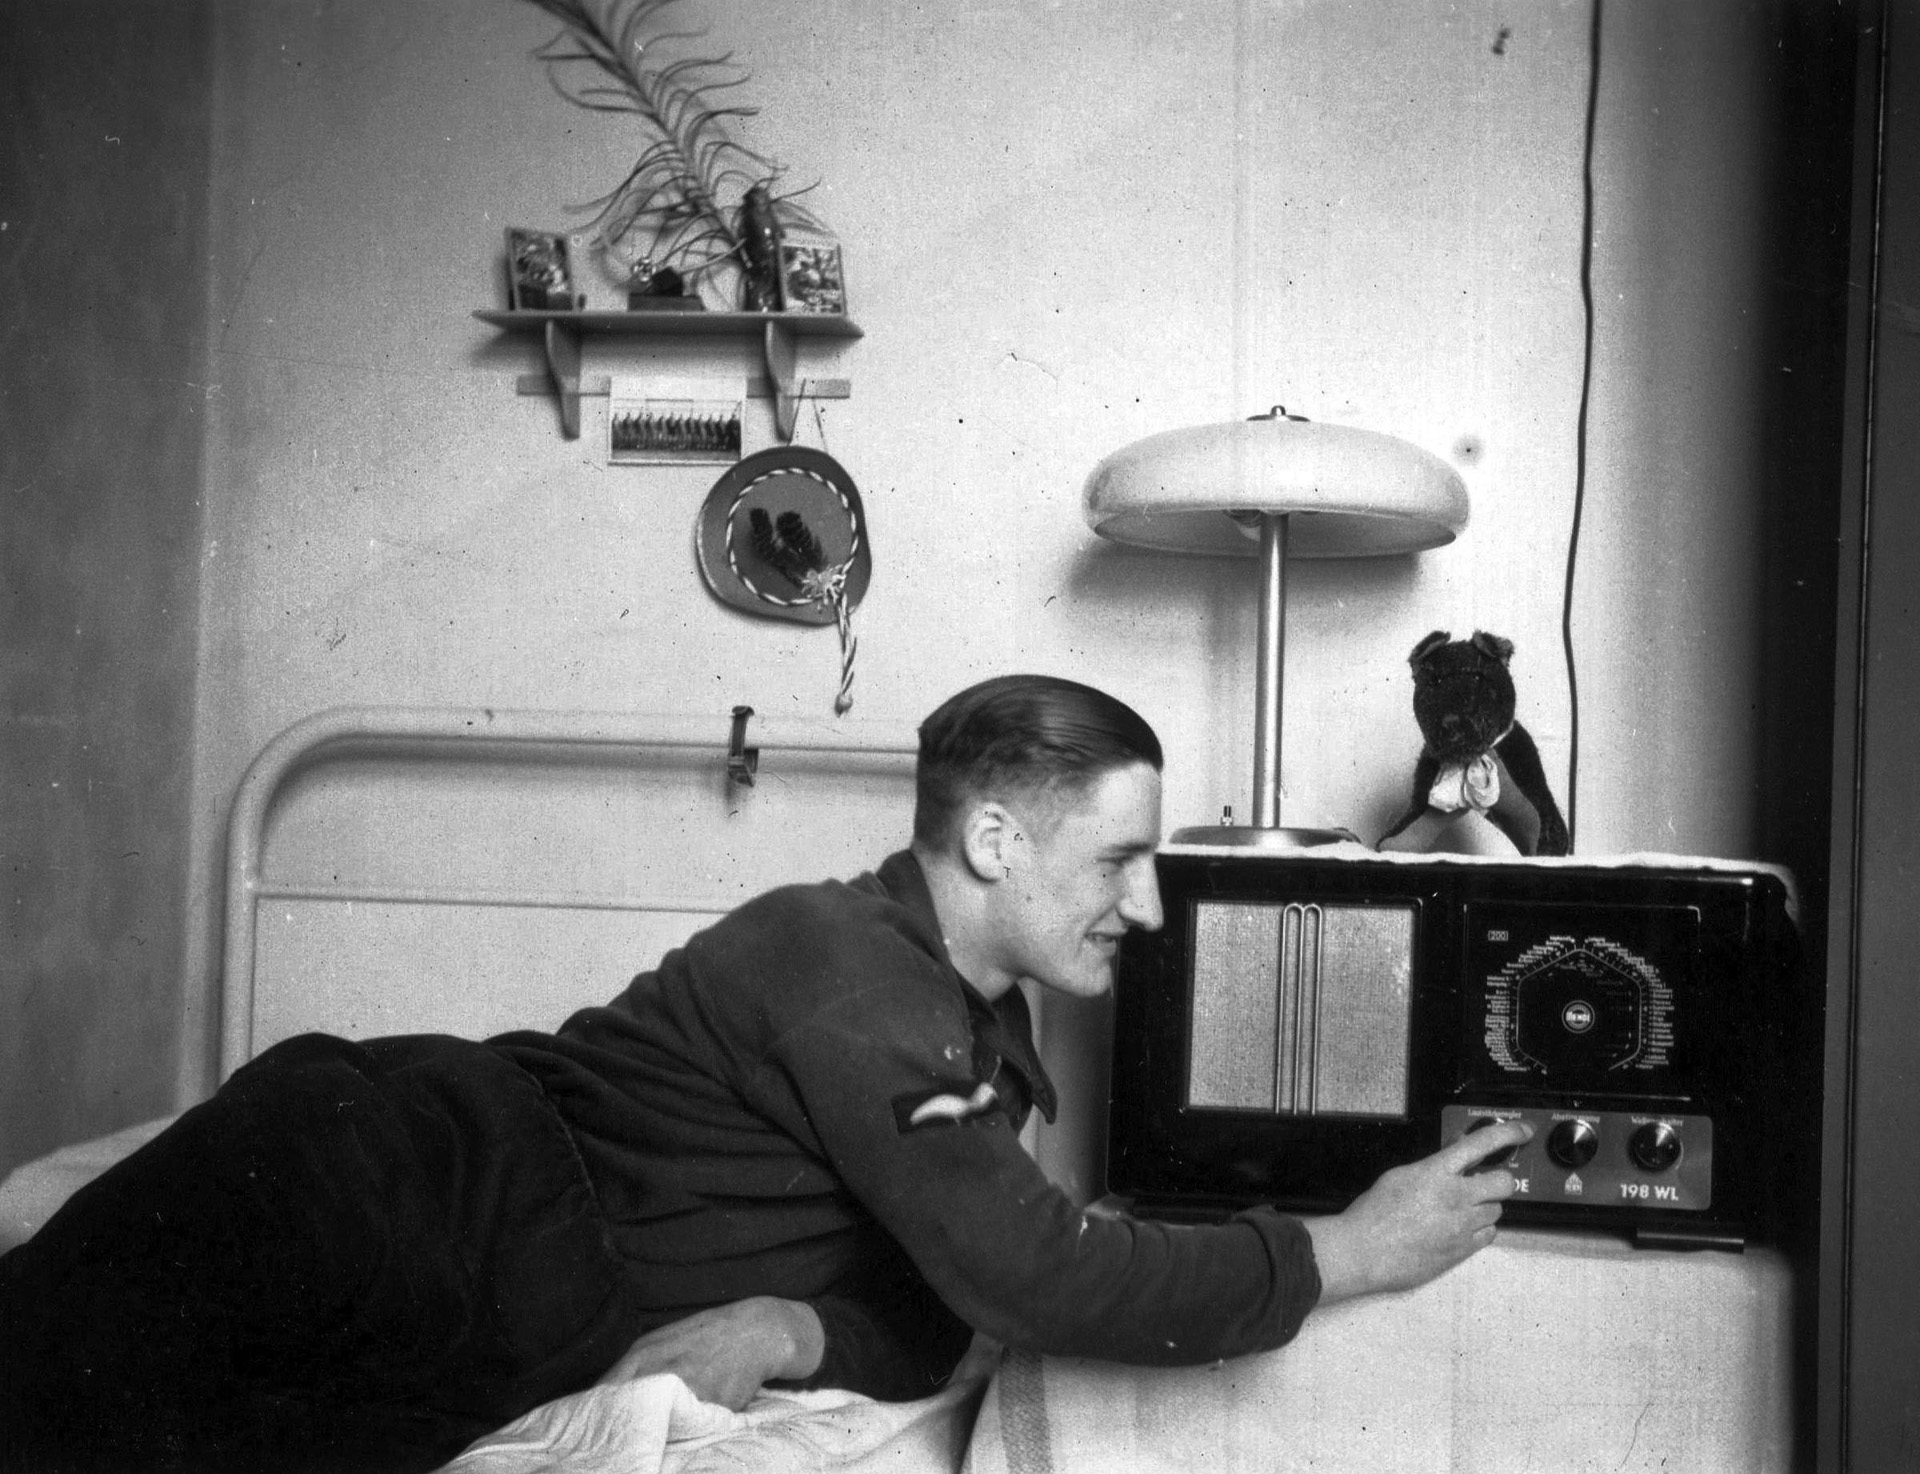 A soldier has a high-end, advanced shortwave radio capable of tuning in the world, although certain stations were verboten. Nazi Germany had the densest “radio population” of any country. In great part this was spurred on by the State’s program for the mass production of low-cost “peoples’ radios.” By 1942, of some 23 million German households, 16 million had radios, making Third Reich indoctrination by radio almost all pervasive. Hitler, rumored killed in the July 20, 1944, plot, dispelled that notion by speaking by radio to the nation. The German radio system functioned to the end when it announced Hitler’s real death—the last broadcast of the Third Reich.